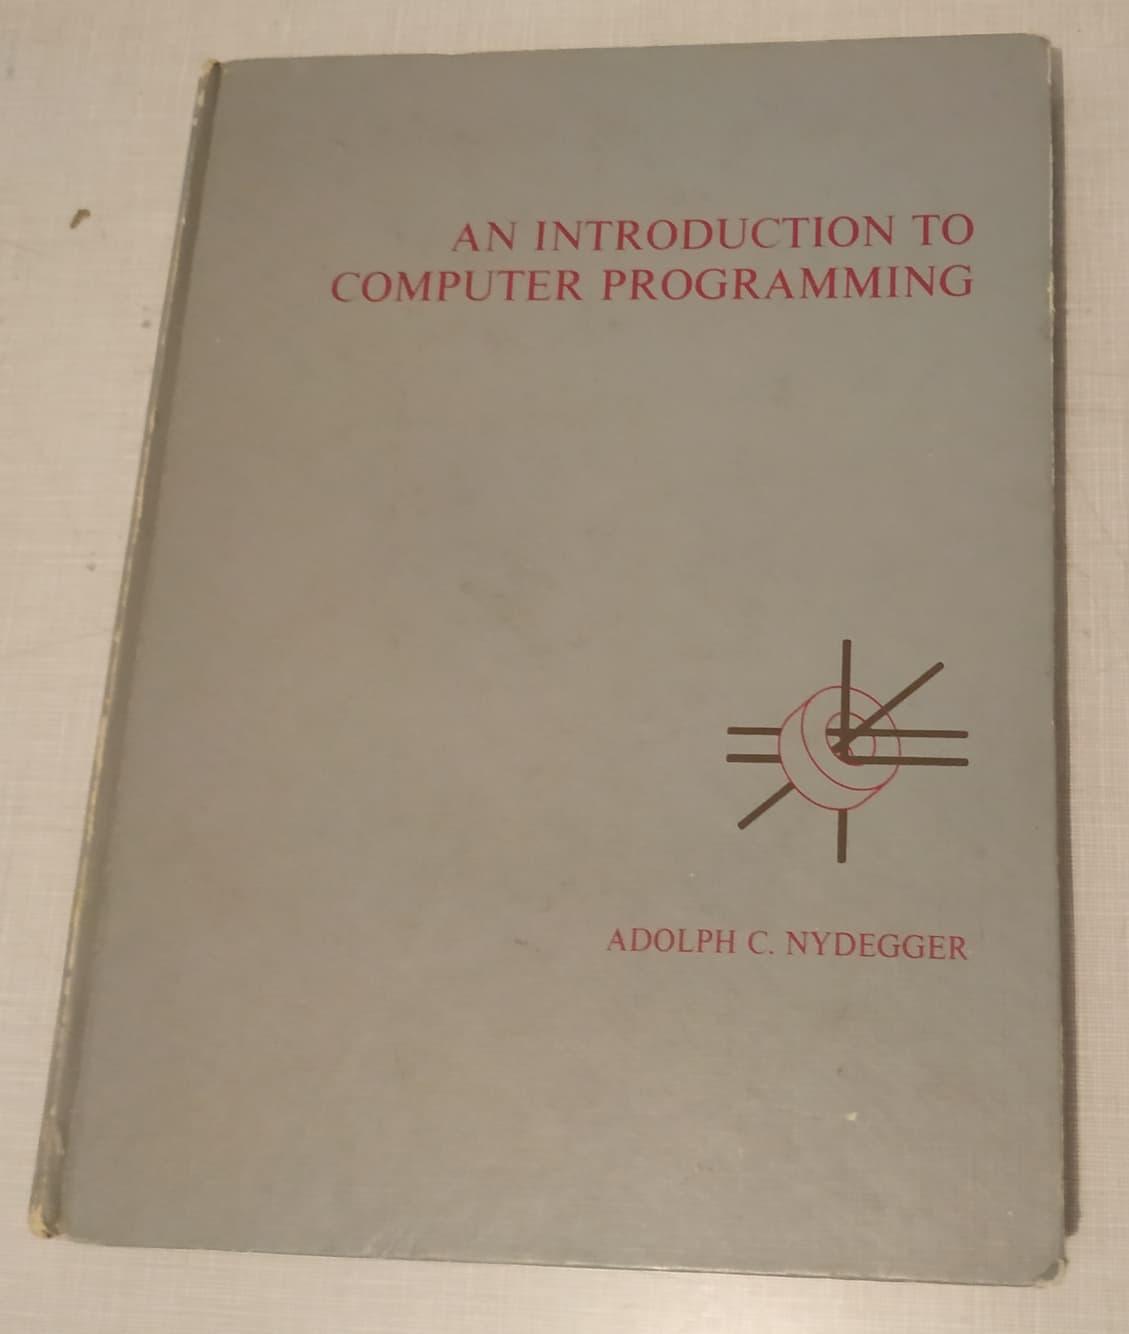 The cover of An Introduction to Computer Programming by Adolph C. Nydegger